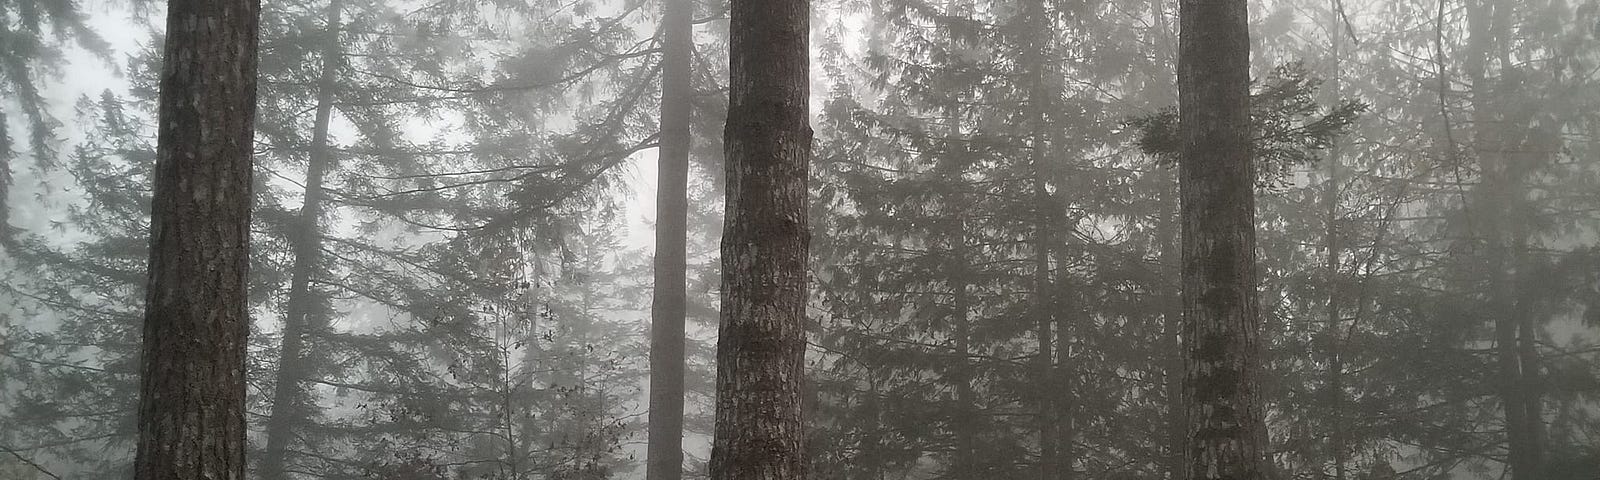 A foggy forest scene with a hand made wooden bench